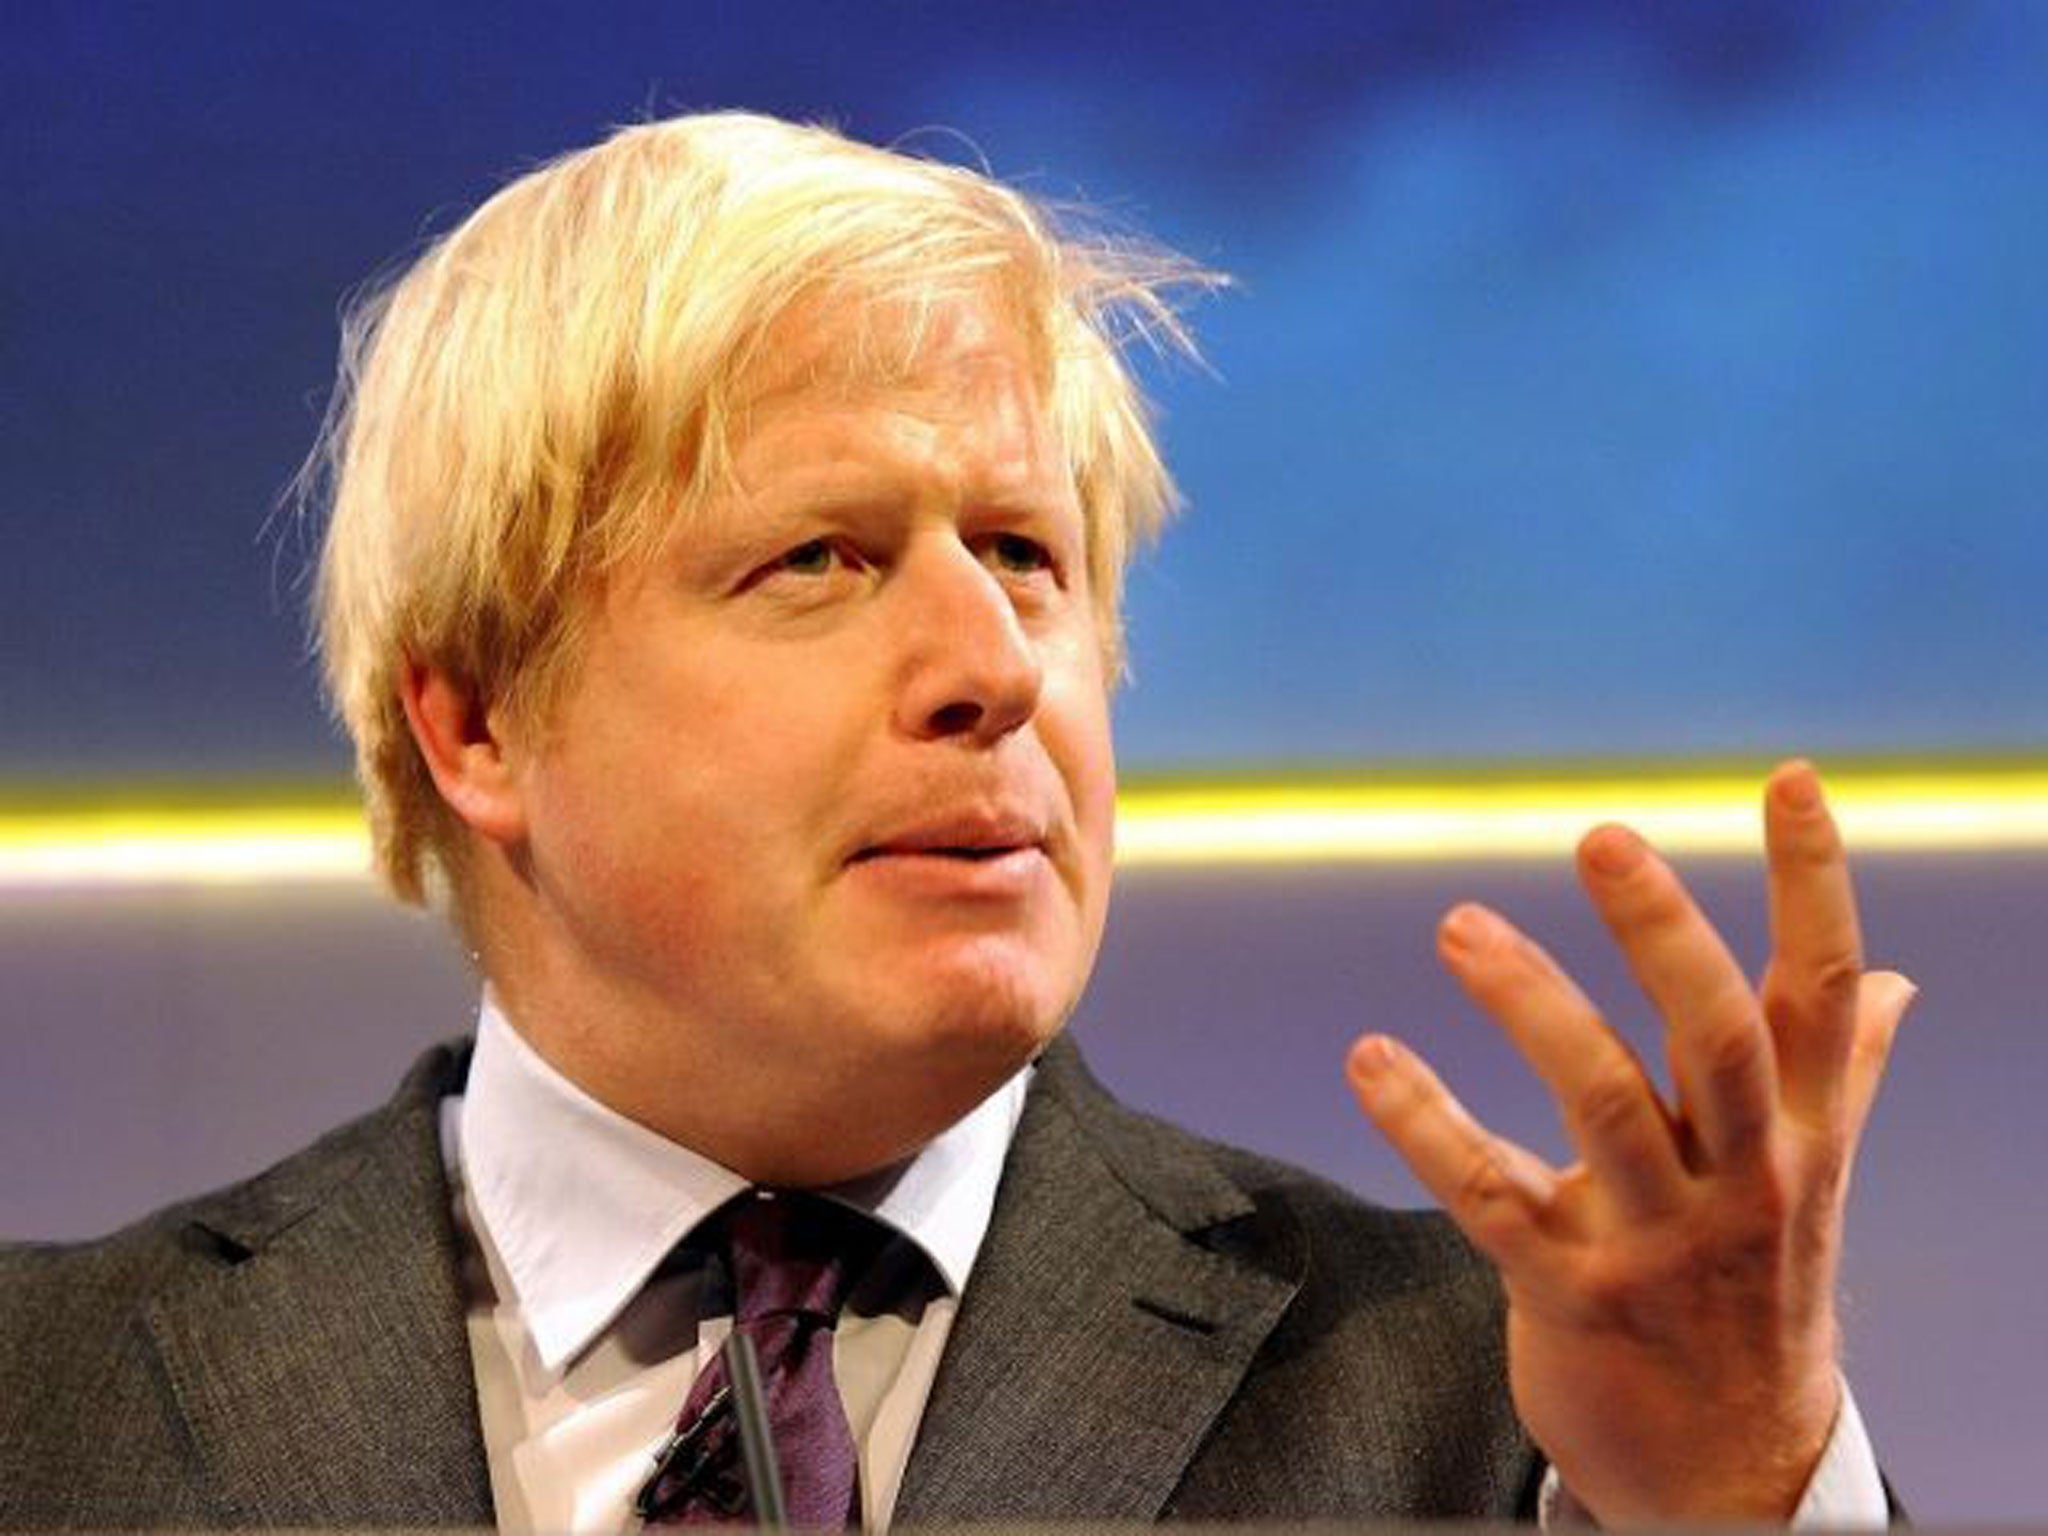 With his wild mess of blonde hair and an instantly recognisable bumbling demeanor, Boris Johnson is one of the most famous politicians in Britain; but as he discovered during the first part of a business trip to India today - his fame hasn't quite reached the streets of Delhi.